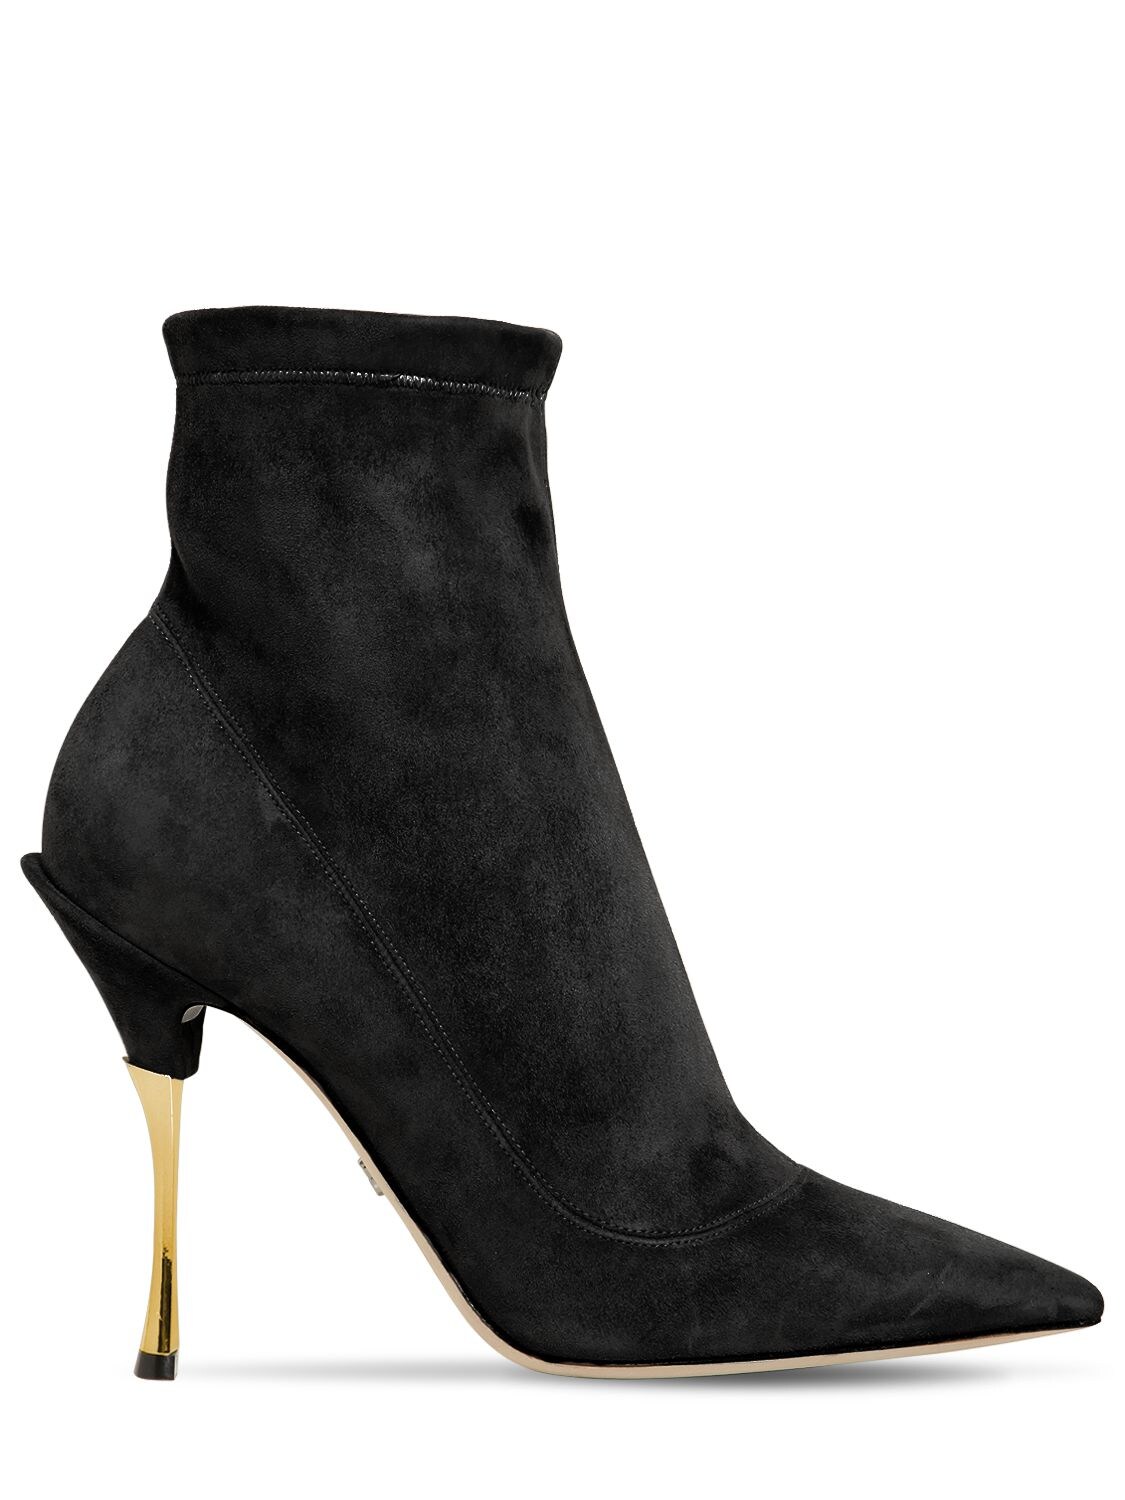 Dolce & Gabbana 105mm Stretch Suede Ankle Boots In Black